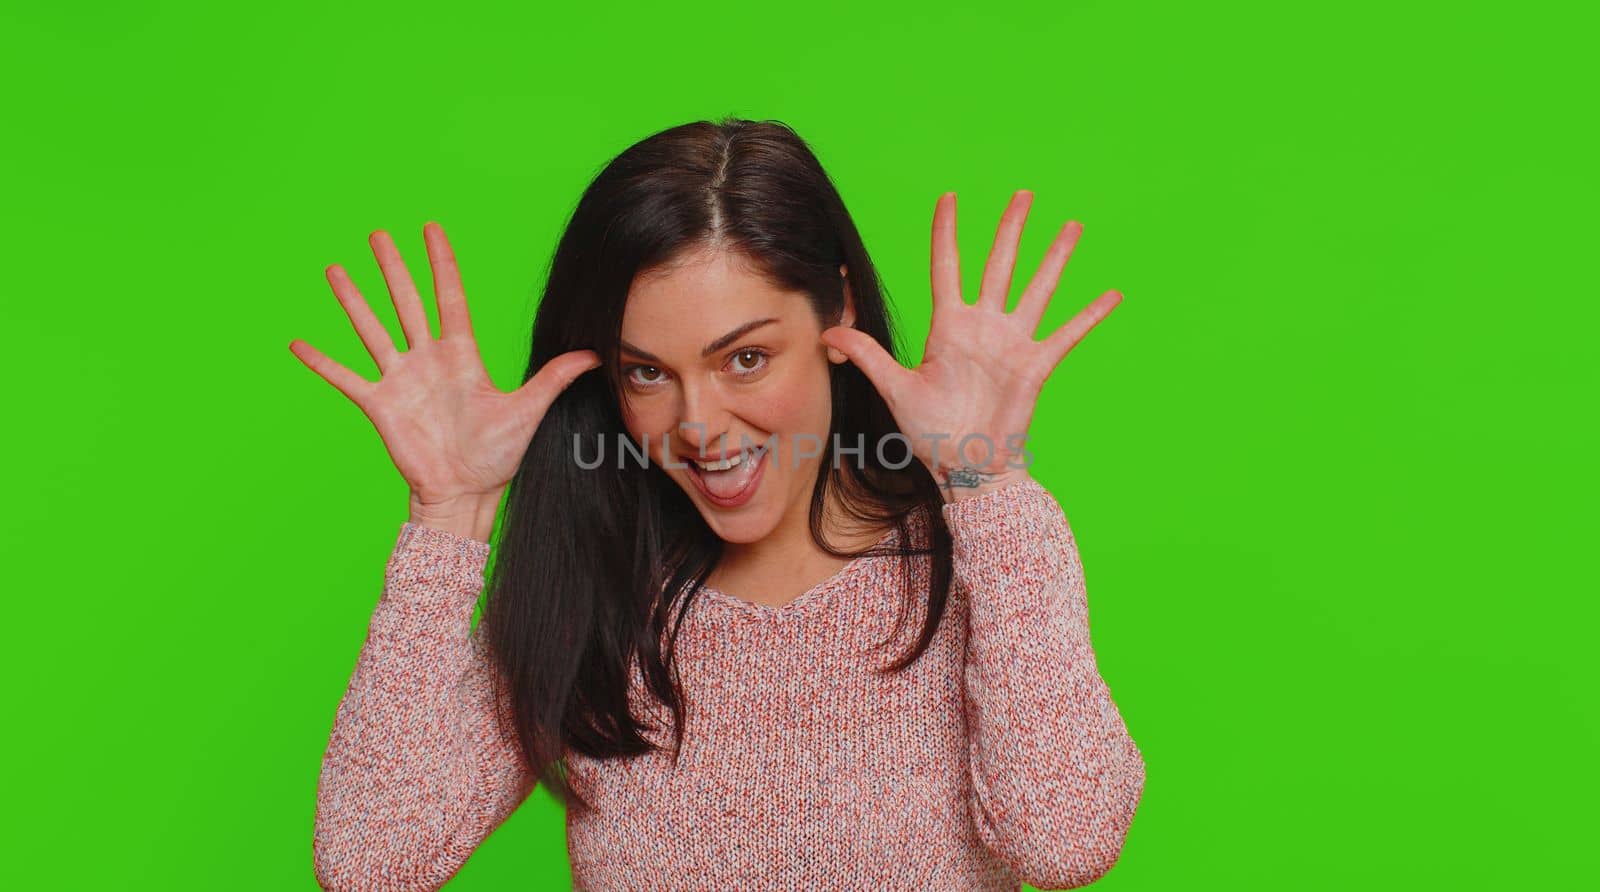 Funny joyful sincere woman 30 years old dancing, making playful silly facial expressions and grimacing, fooling around showing tongue. Young lovely pretty girl isolated alone on chroma key background